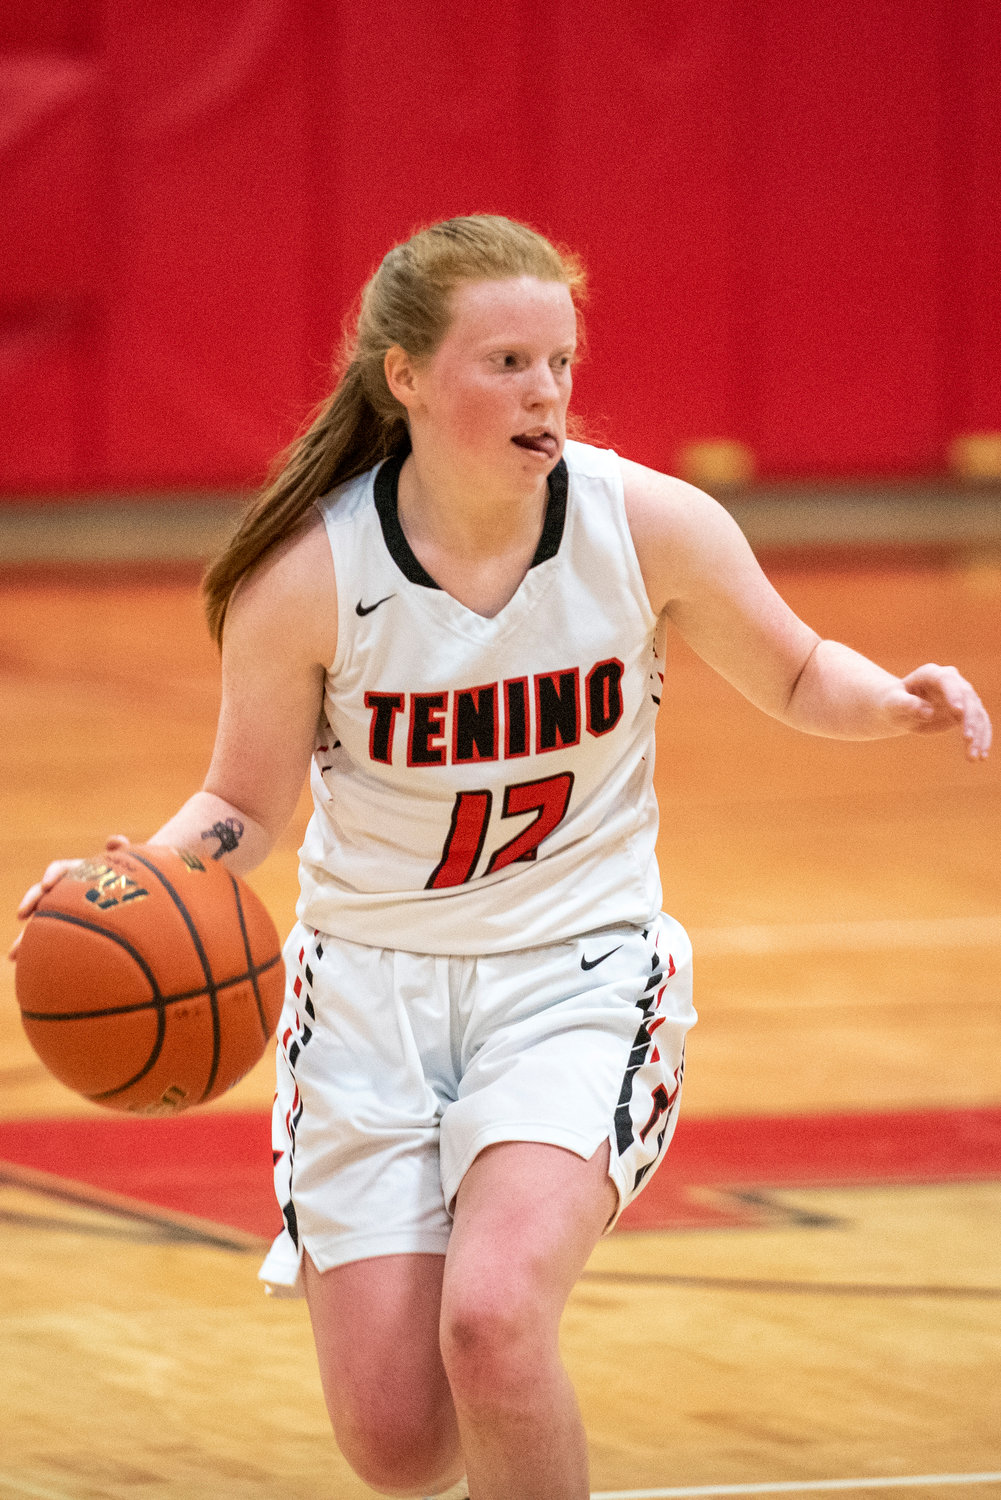 Tenino's Abby Severse looks for an opening against Adna's defense on Dec. 14.